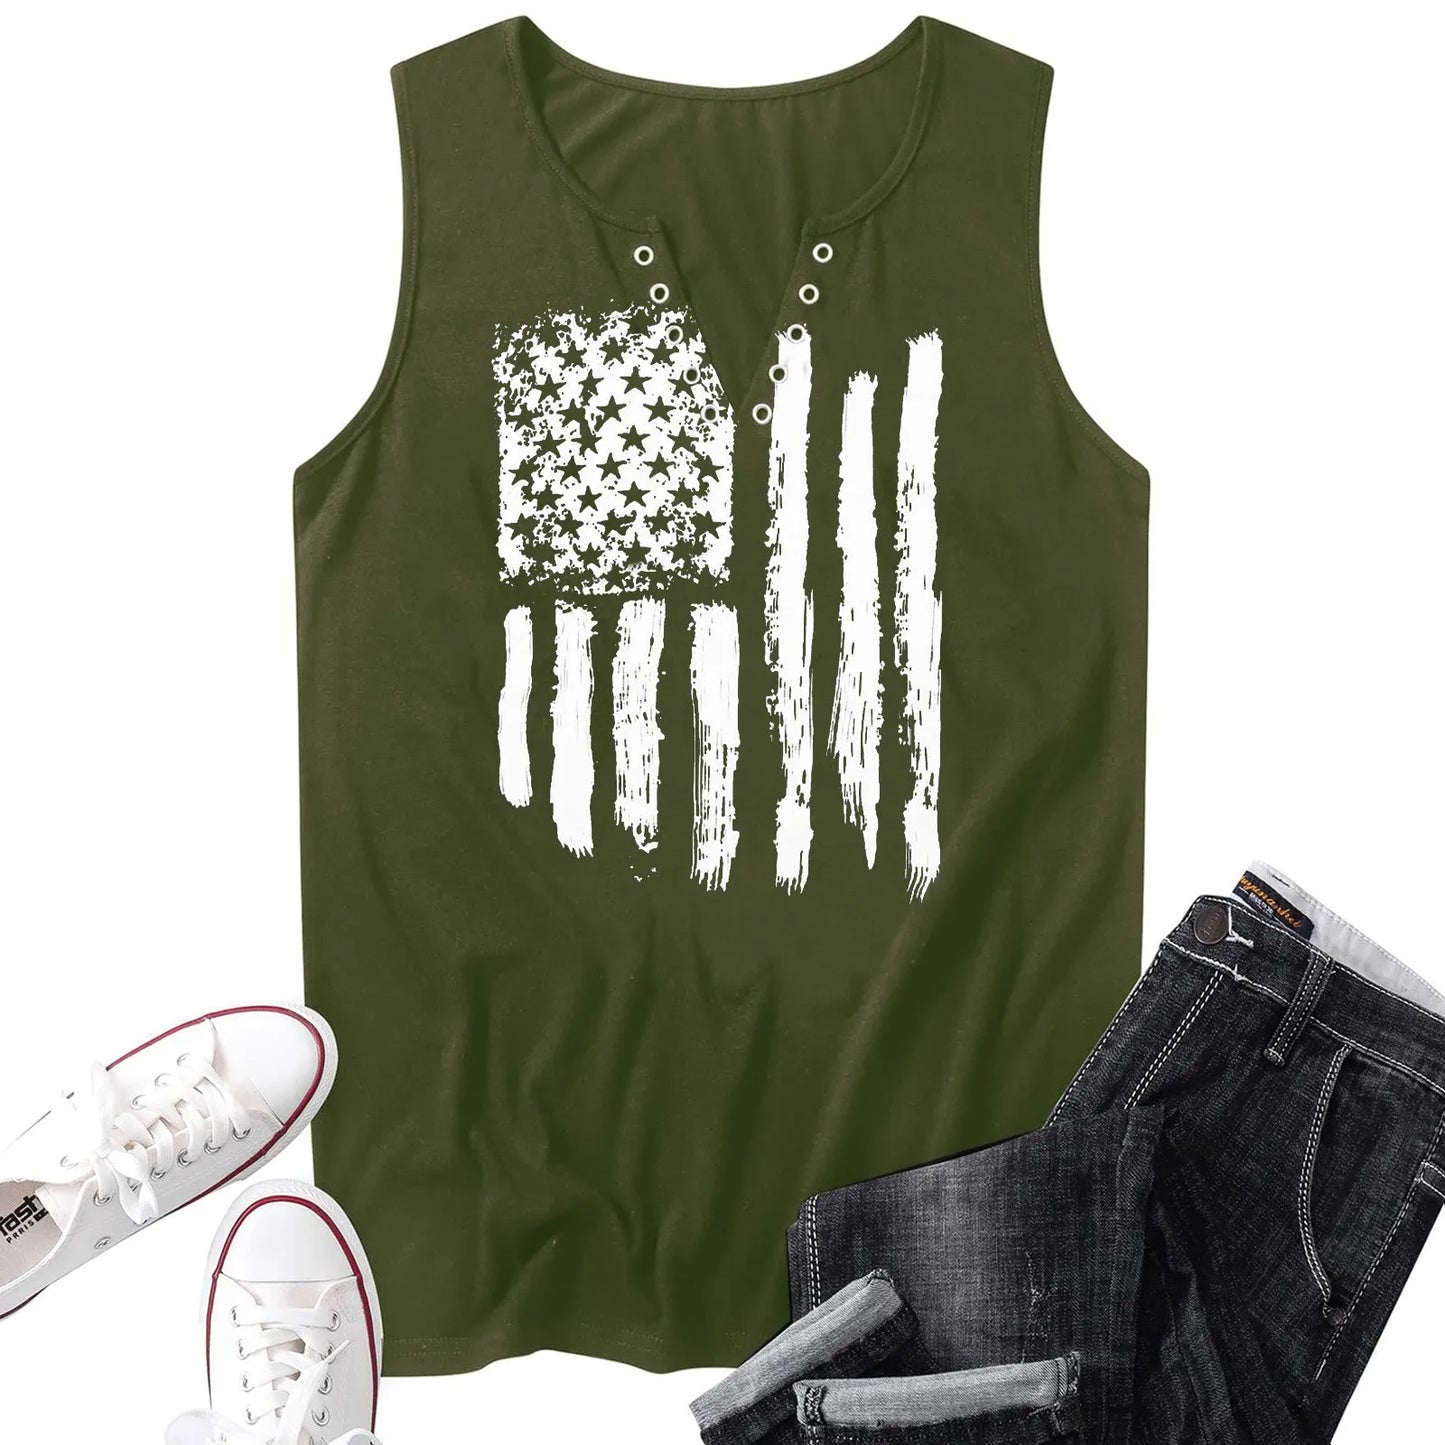 Women's American Flag Print Tank Top For 4th Of July Shirts Button V-neck Sleeveless T-shirt Summer Casual Patriotic Shirt Tops